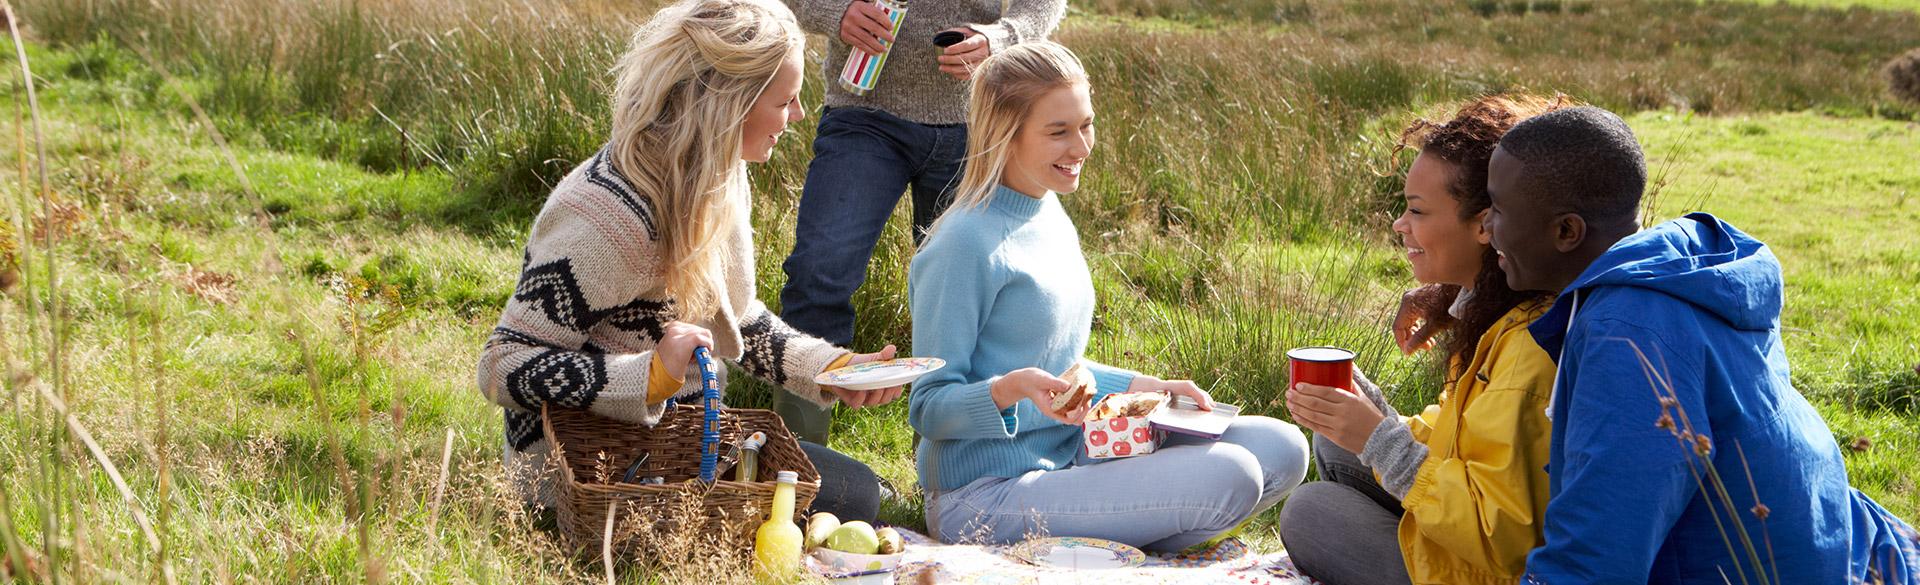 Banner image for How to have the perfect picnic banner image